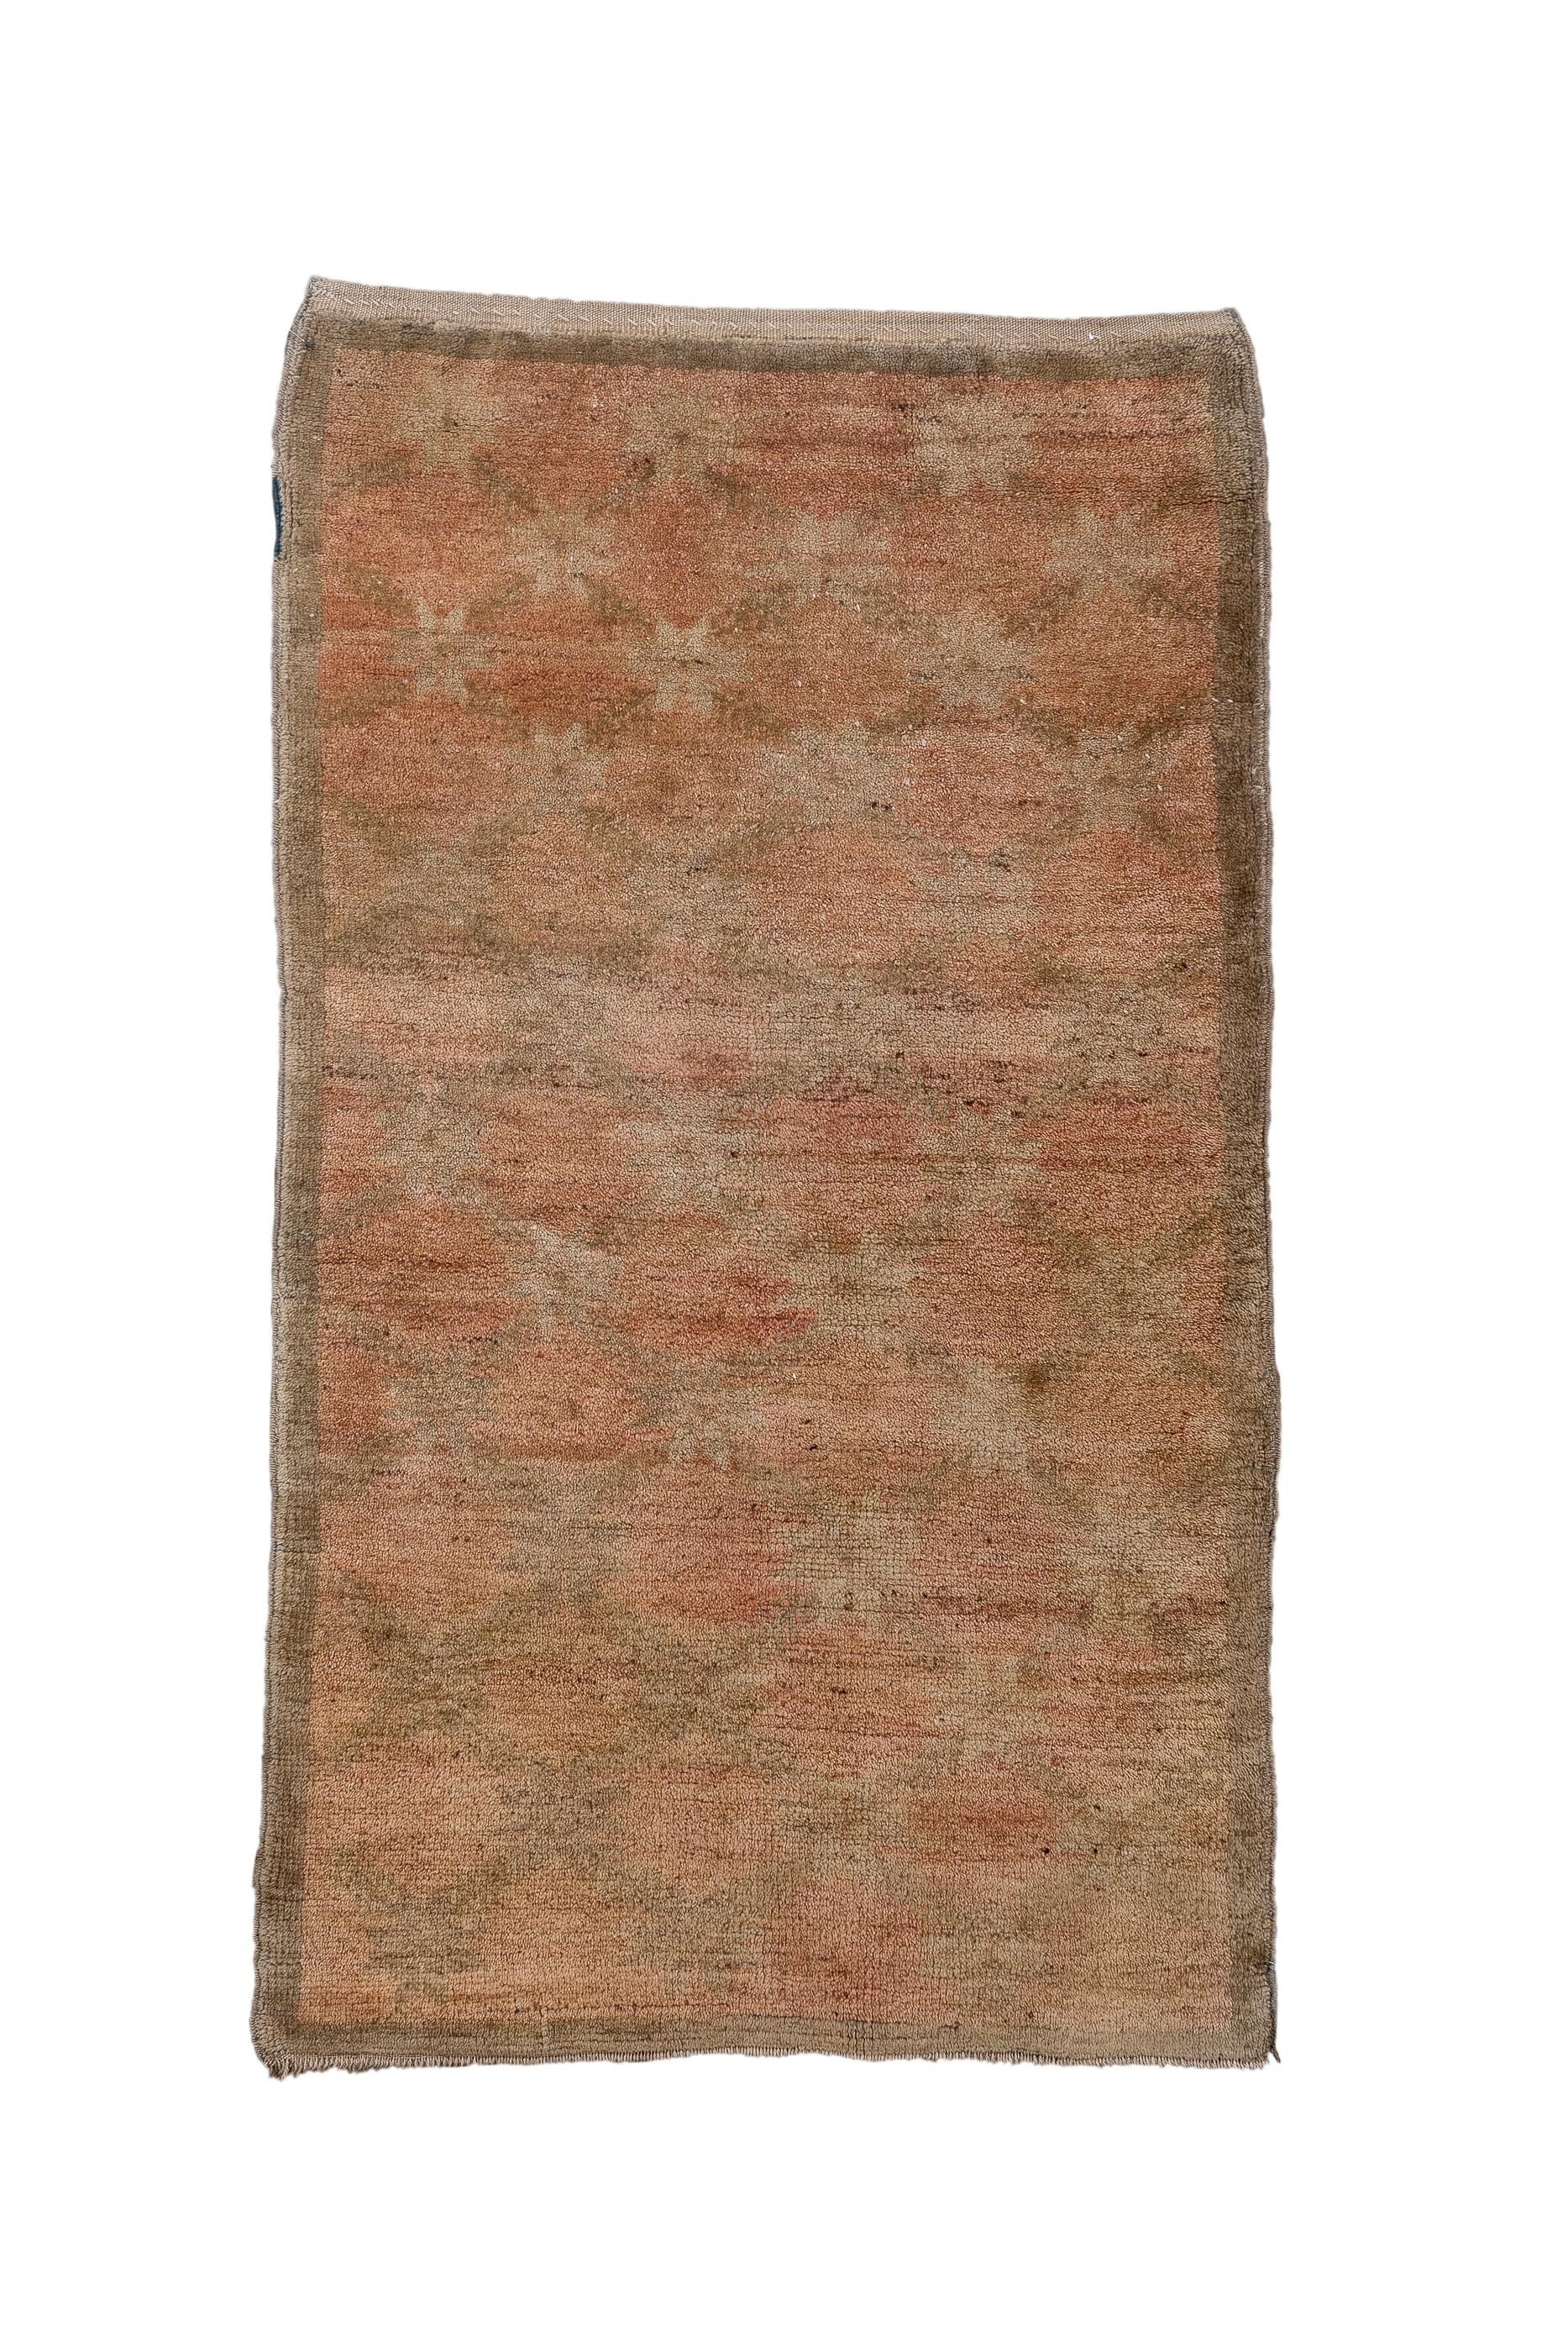 This west Anatolian scatter shows a very simple design of a totally plain salmon field  and an equally plain coral border. Goes anywhere. Coarse weave. High pile. Good condition.

Rug Size
2'9x4'8